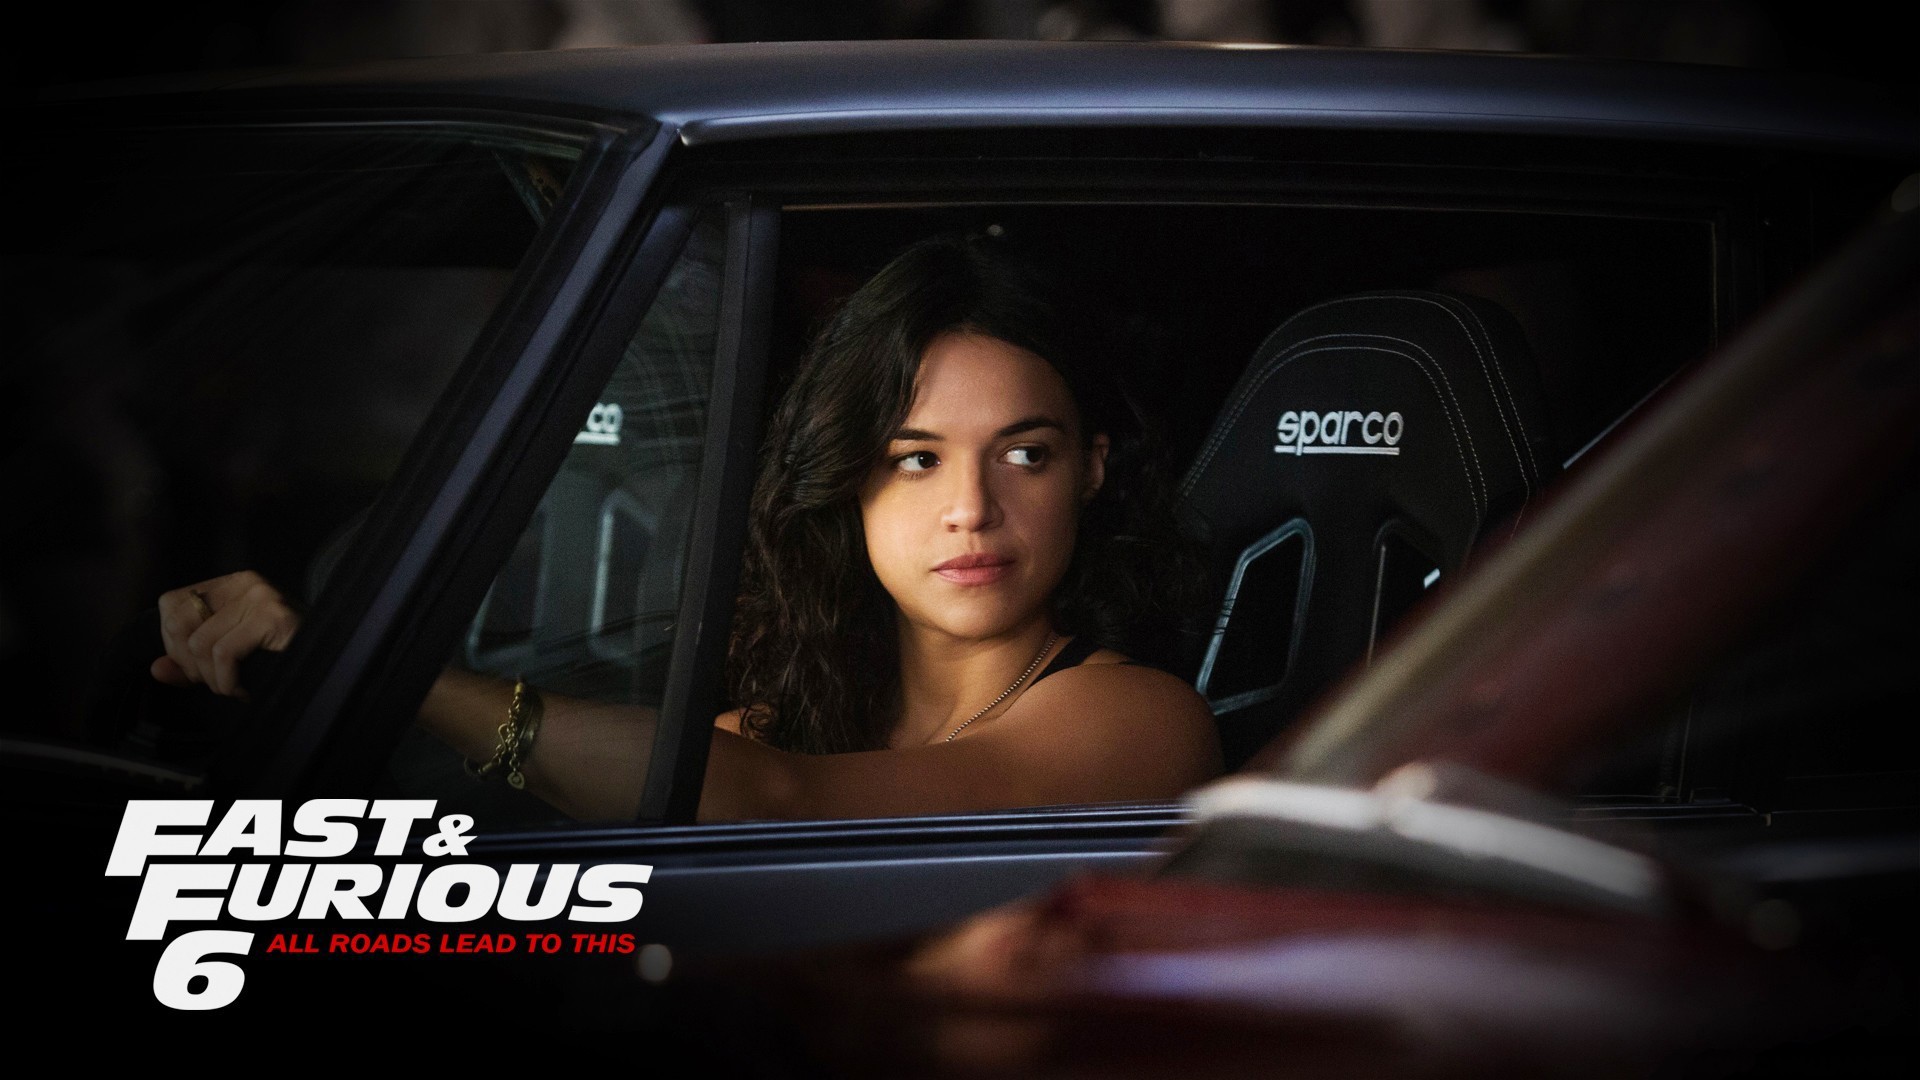 People 1920x1080 Fast and Furious Michelle Rodríguez movies women women with cars car vehicle Fast & Furious 6